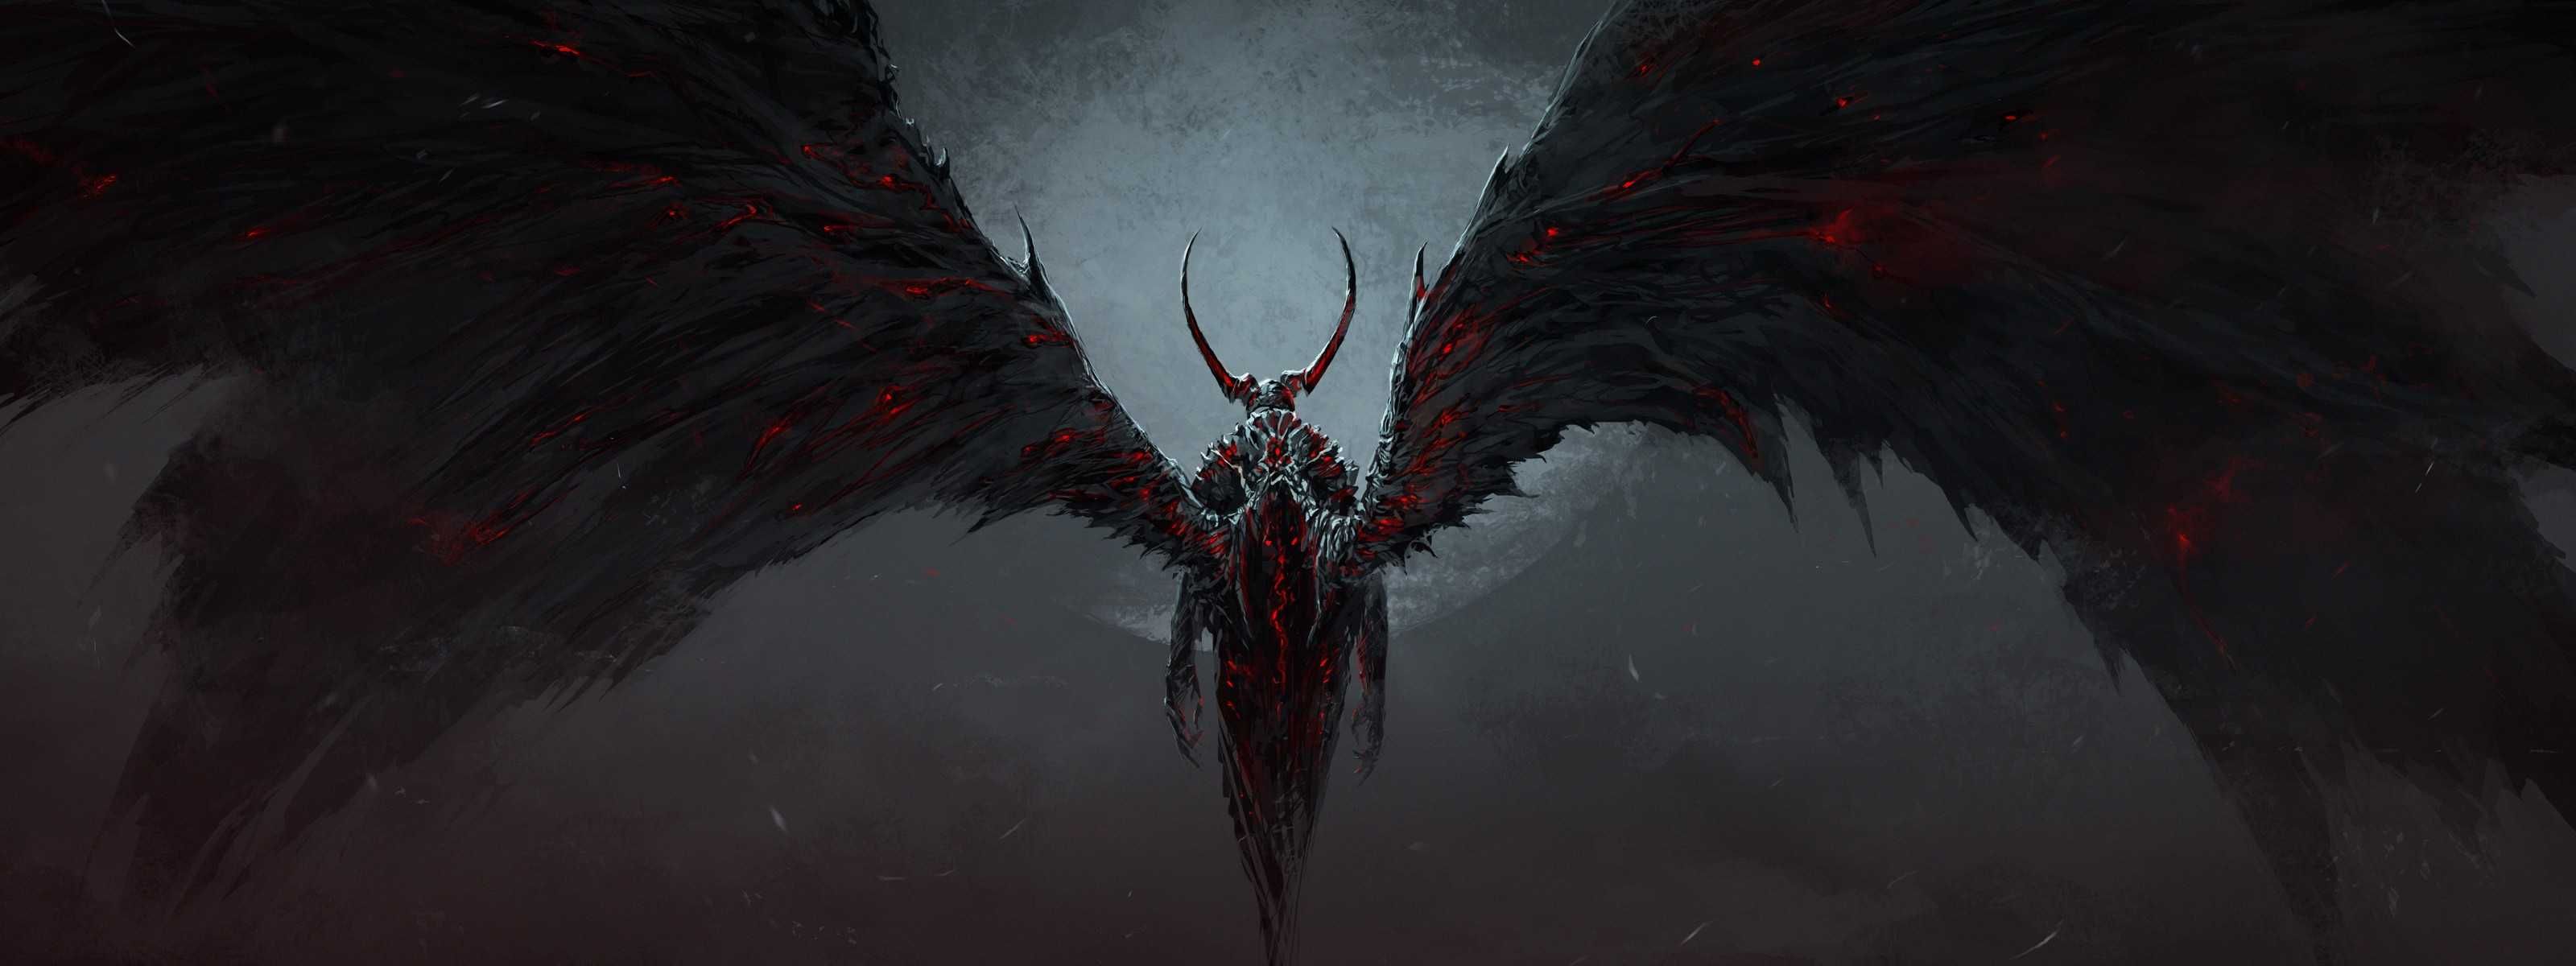 Scary Black Devil Image Background Demon Pictures Scary Background Image  And Wallpaper for Free Download